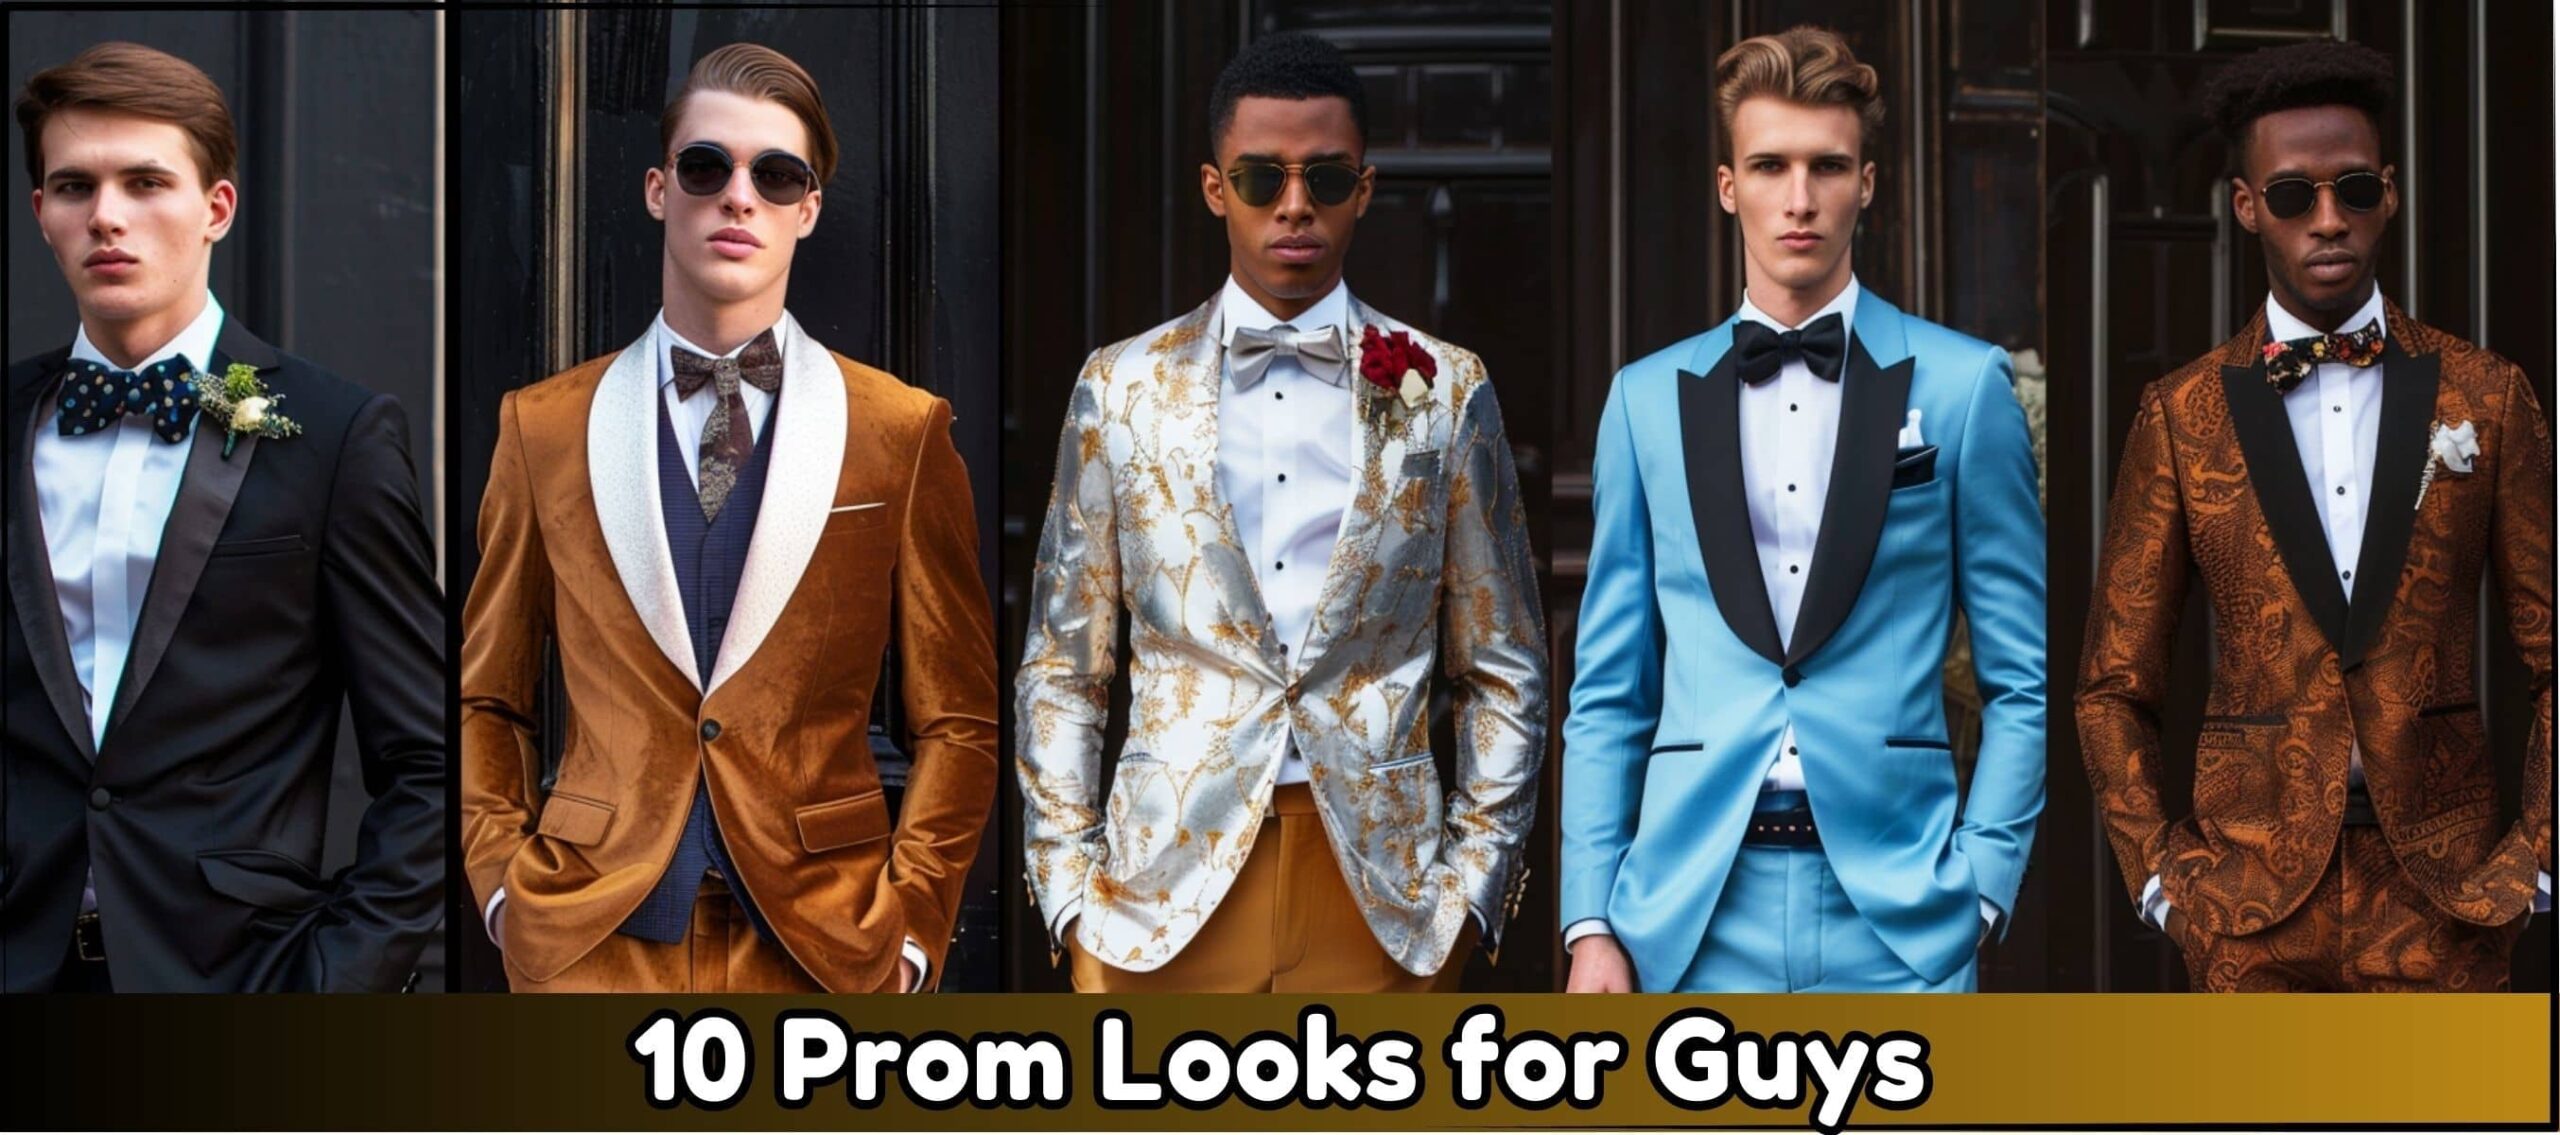 10 Prom Looks for Guys